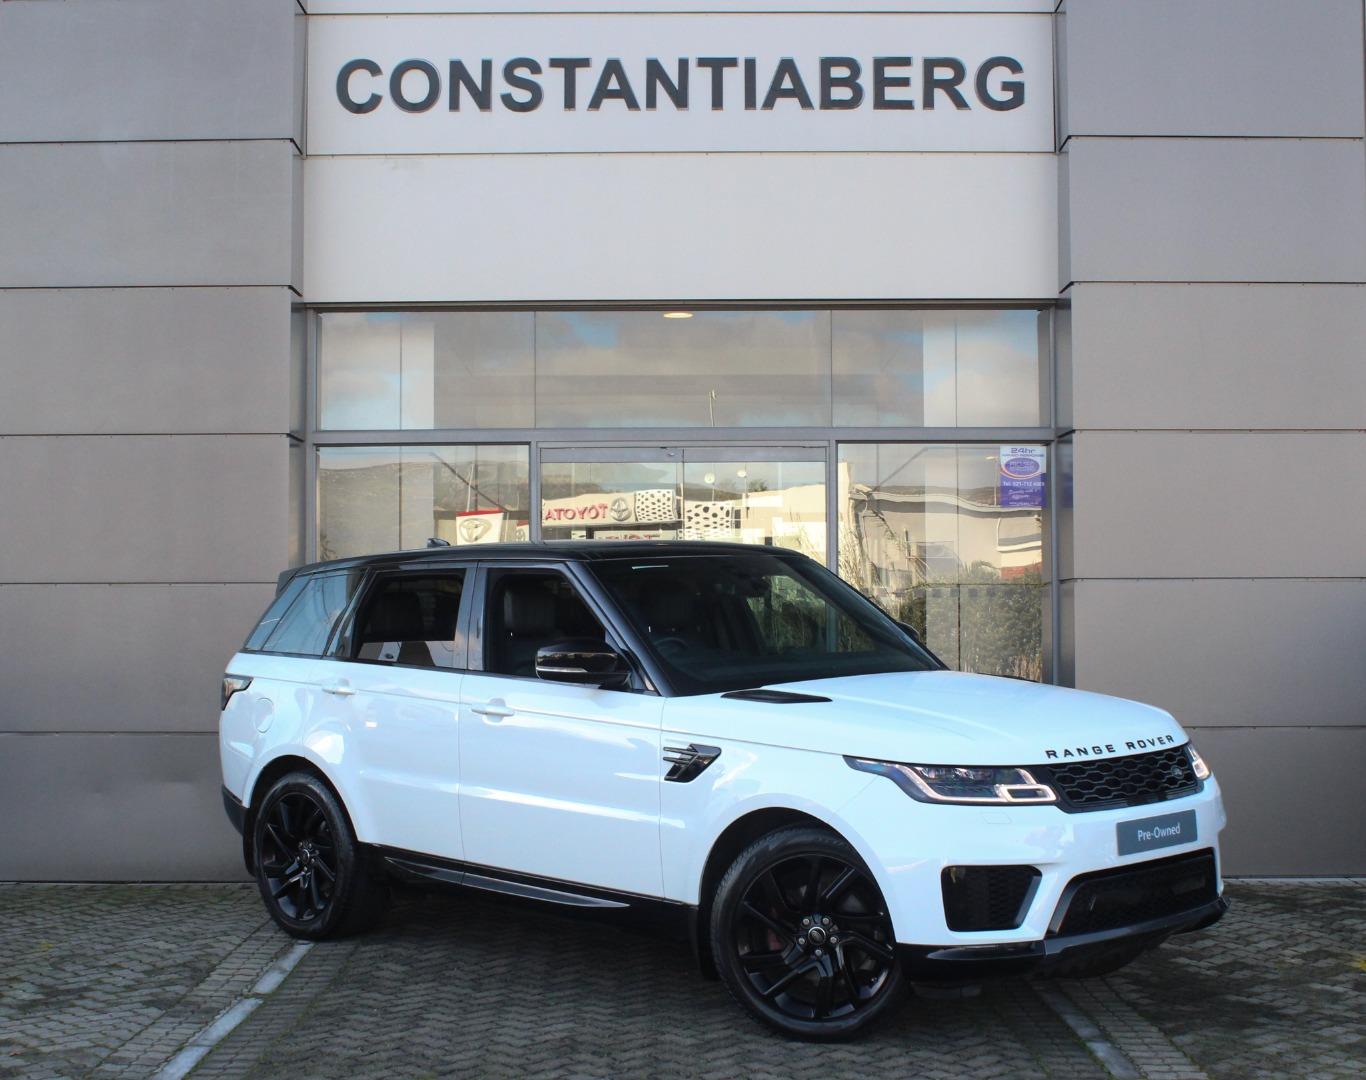 2020 Land Rover Range Rover Sport  for sale - 655689